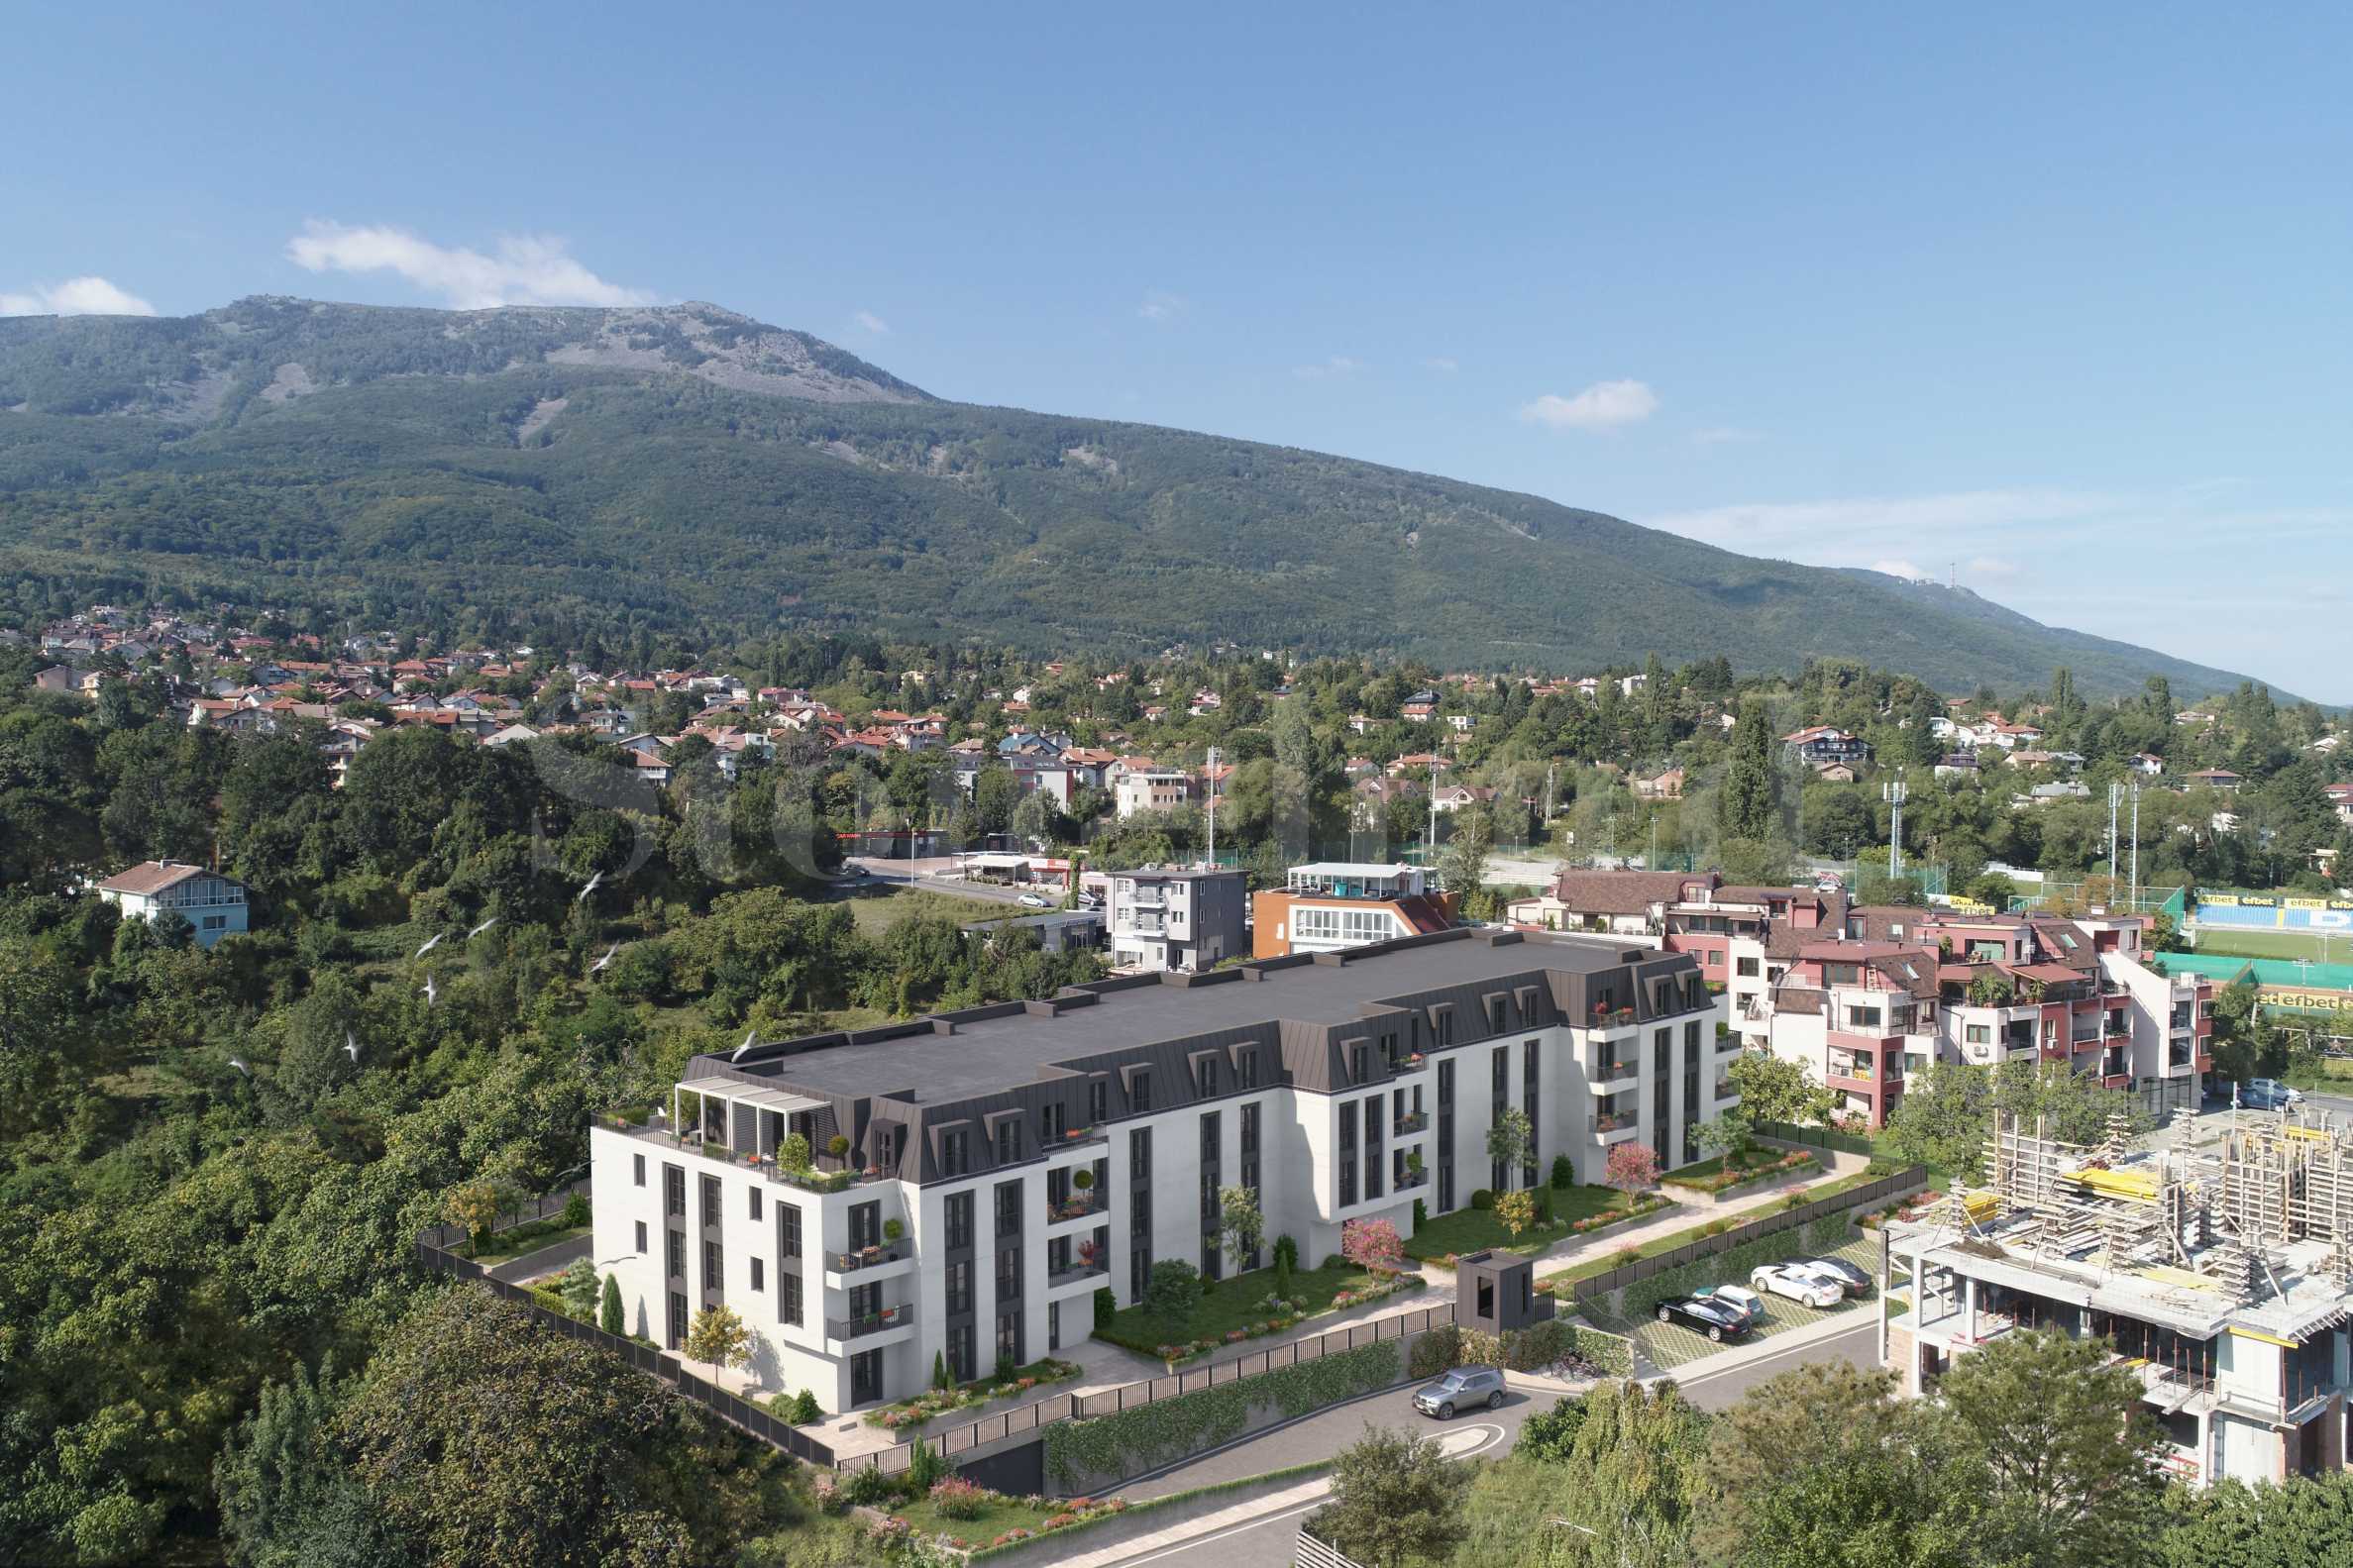  Residence Dragalevtsi at the foot of the mountain near metro station1 - Stonehard